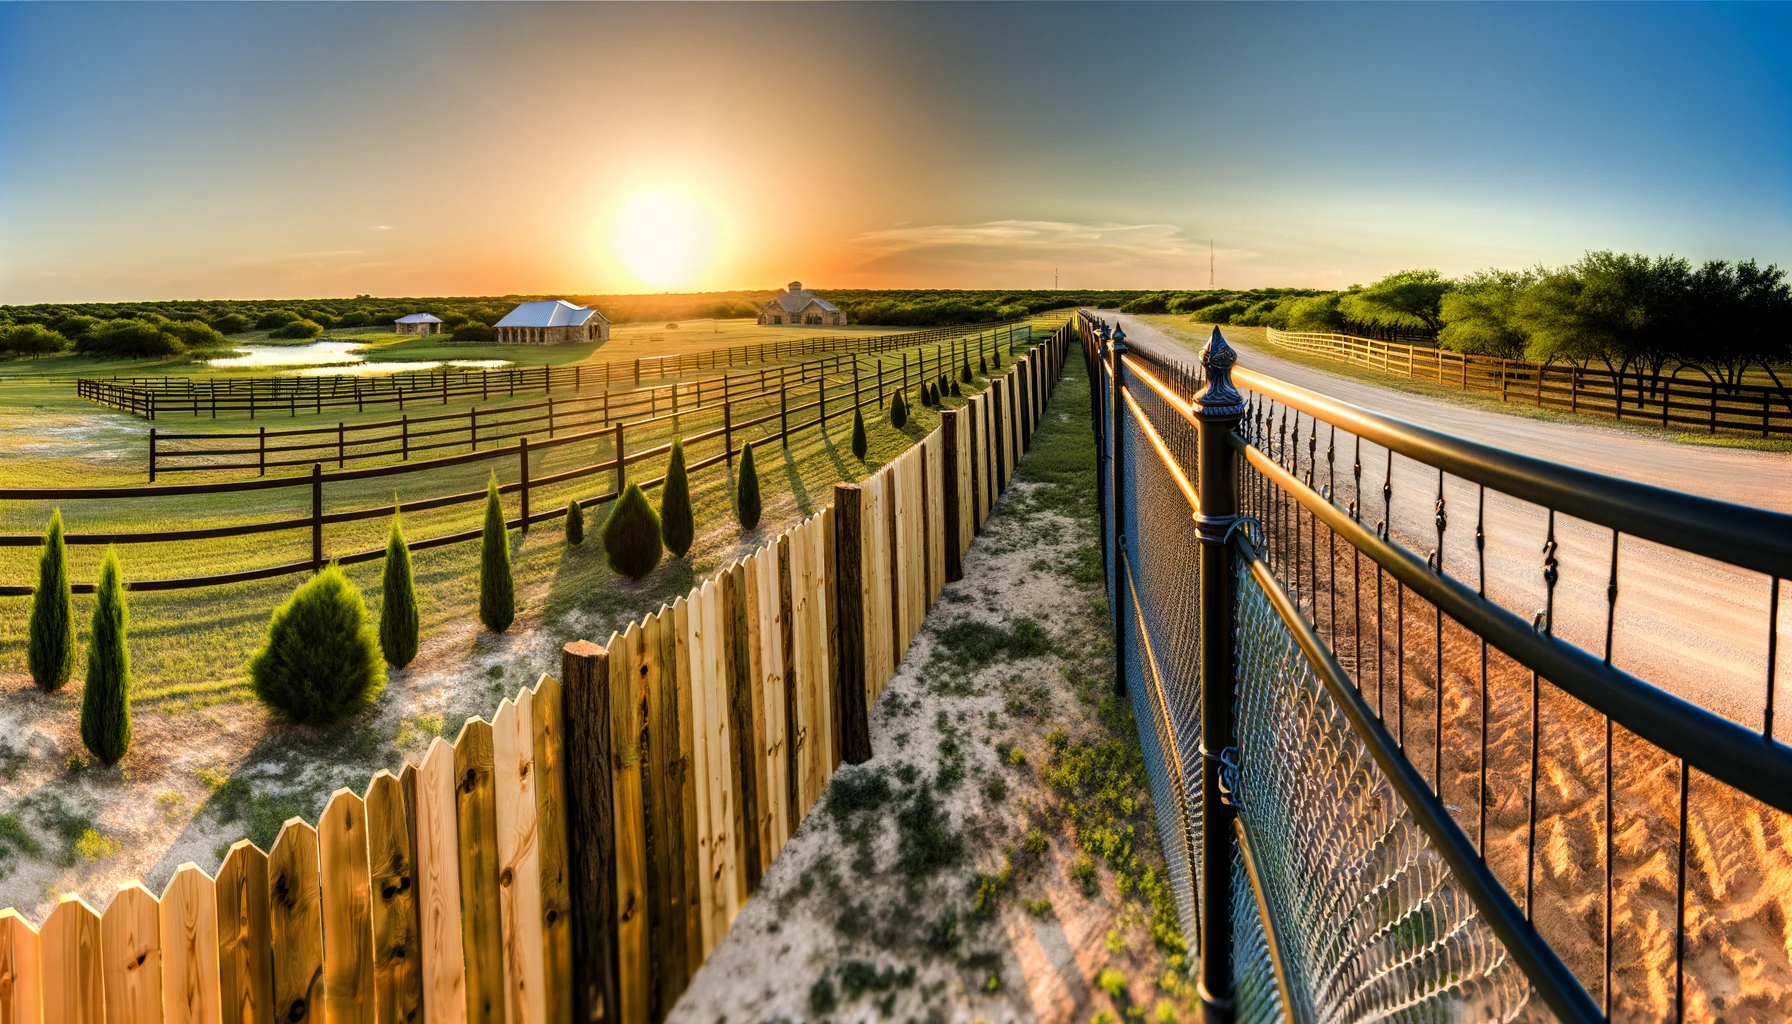 Serene sunset landscape in Laredo, Texas, featuring a variety of fences including chain link, ranch-style wooden, elegant iron, and privacy fences, blending with the natural beauty.